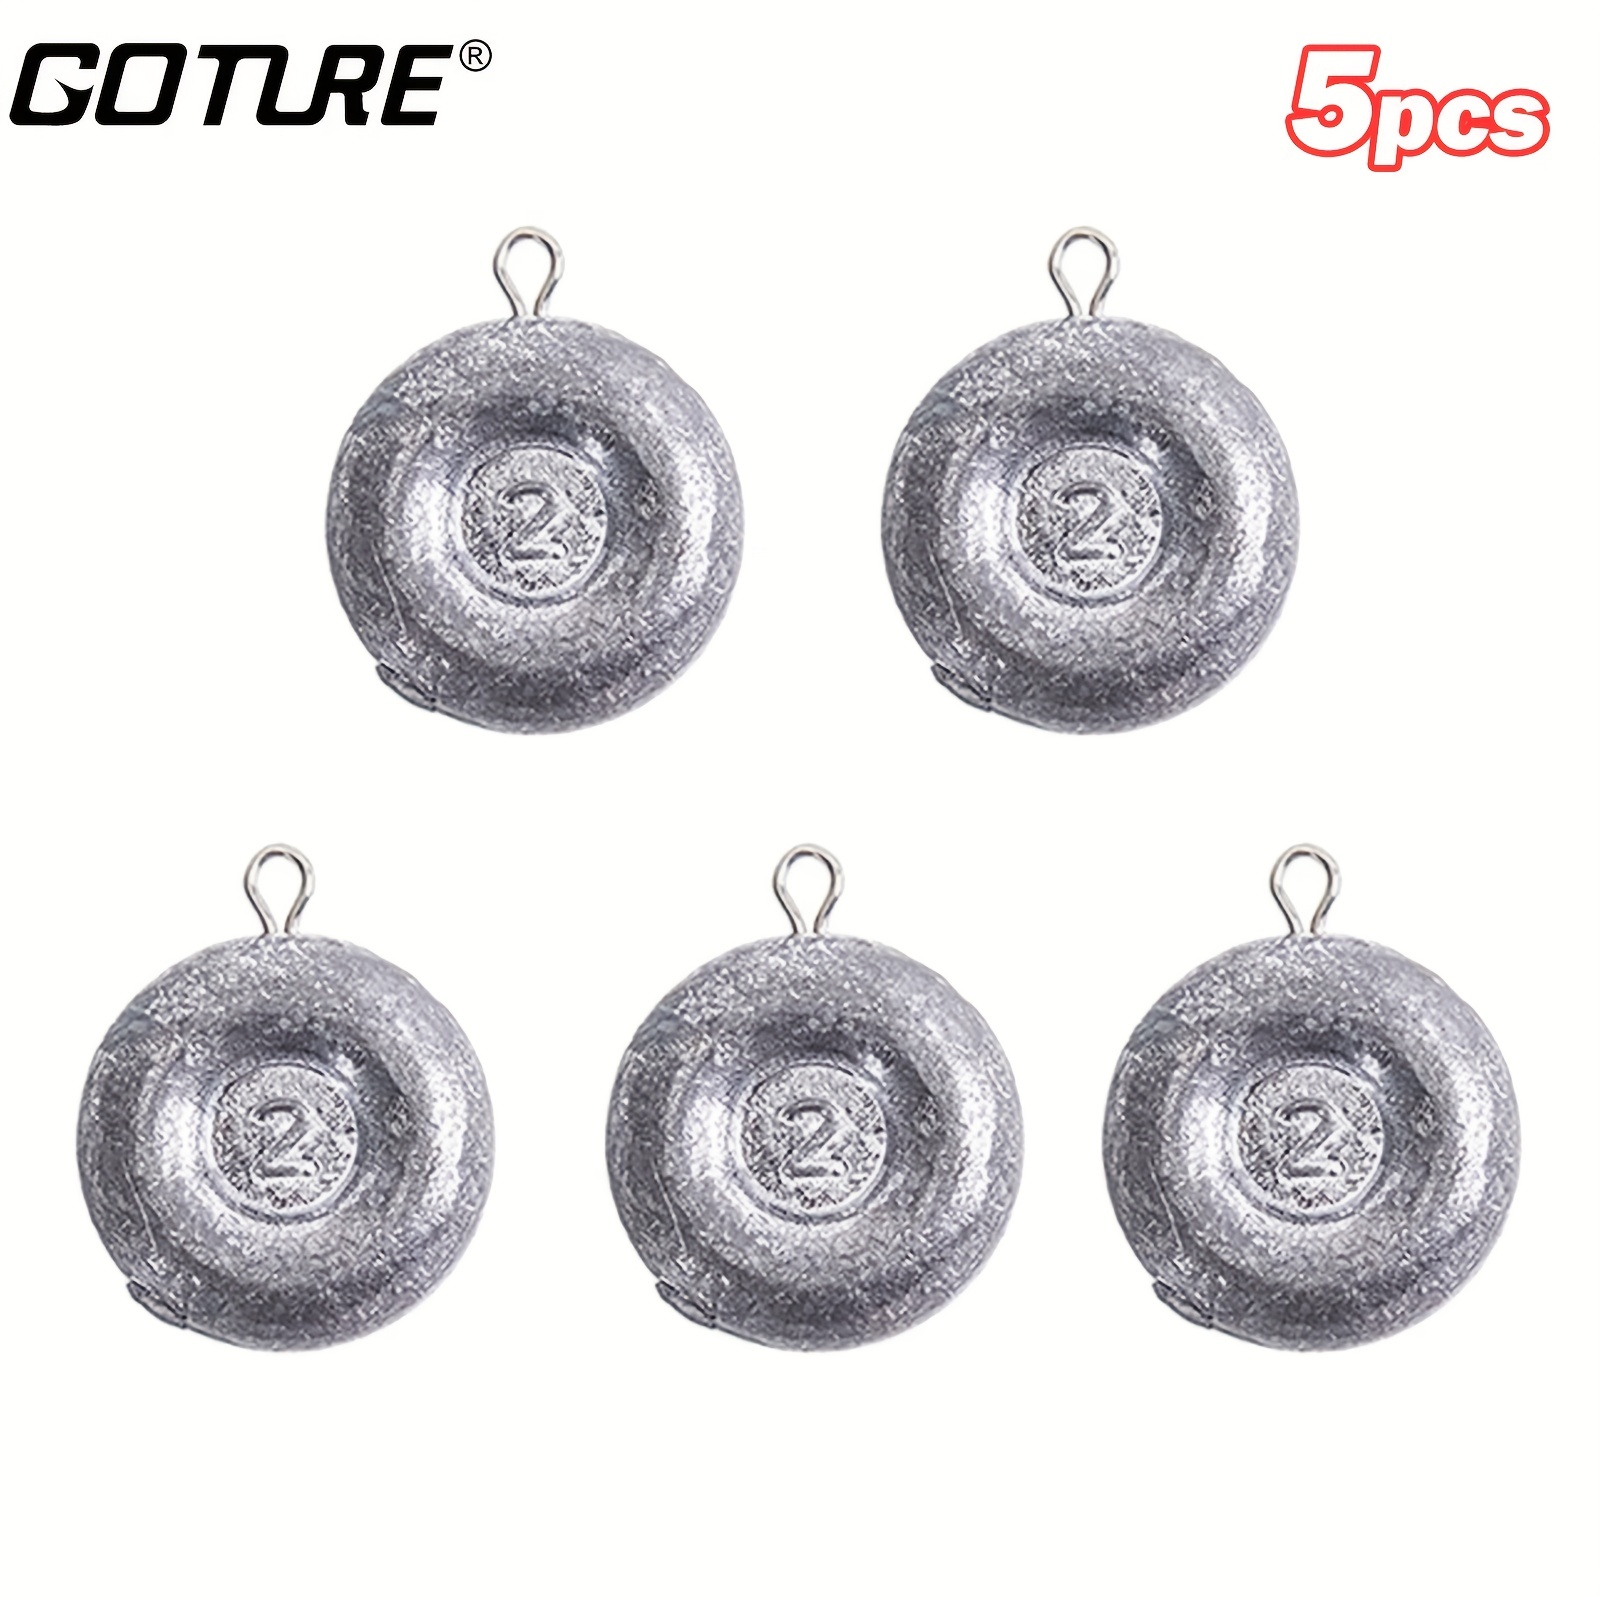 * 5pcs Fishing Weights Disc Sinkers Catfishing Tackle Sinkers Surf Fishing  Lead Weights Coin Sinkers For Saltwater